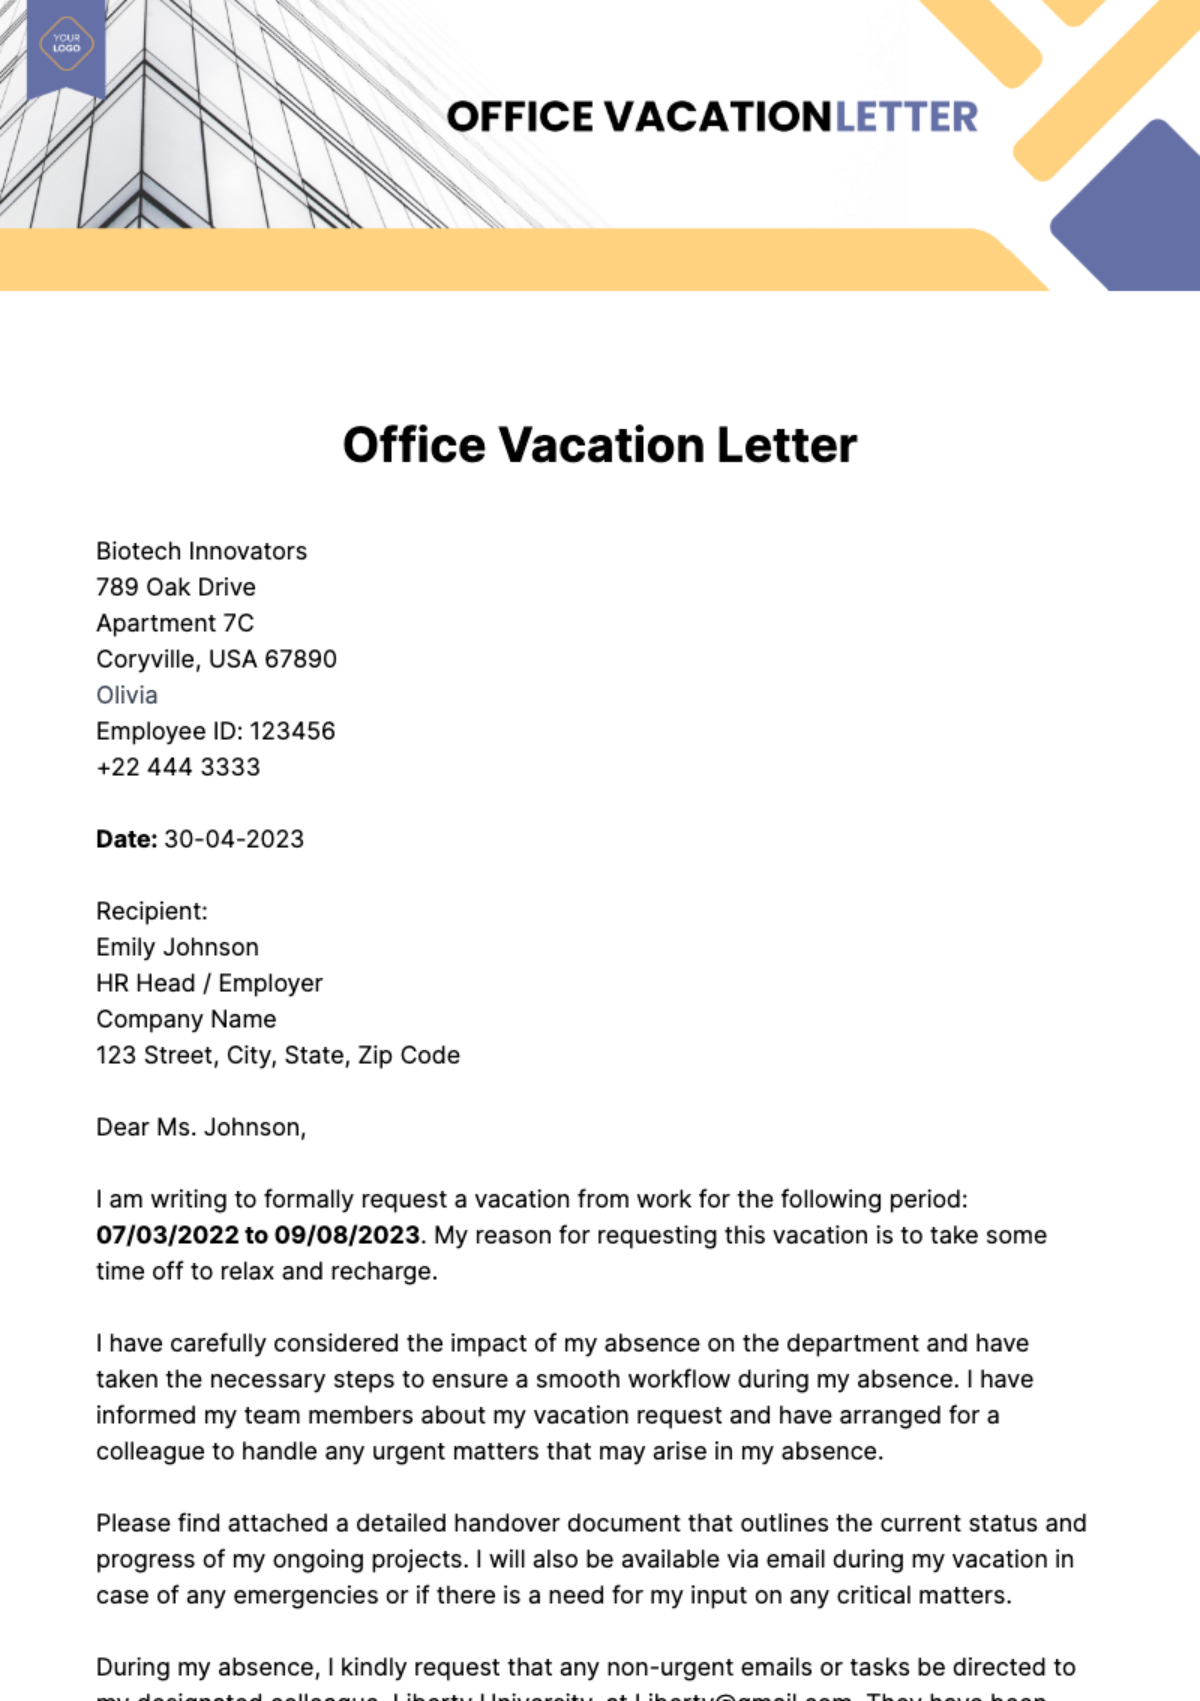 Free Office Vacation Letter Template